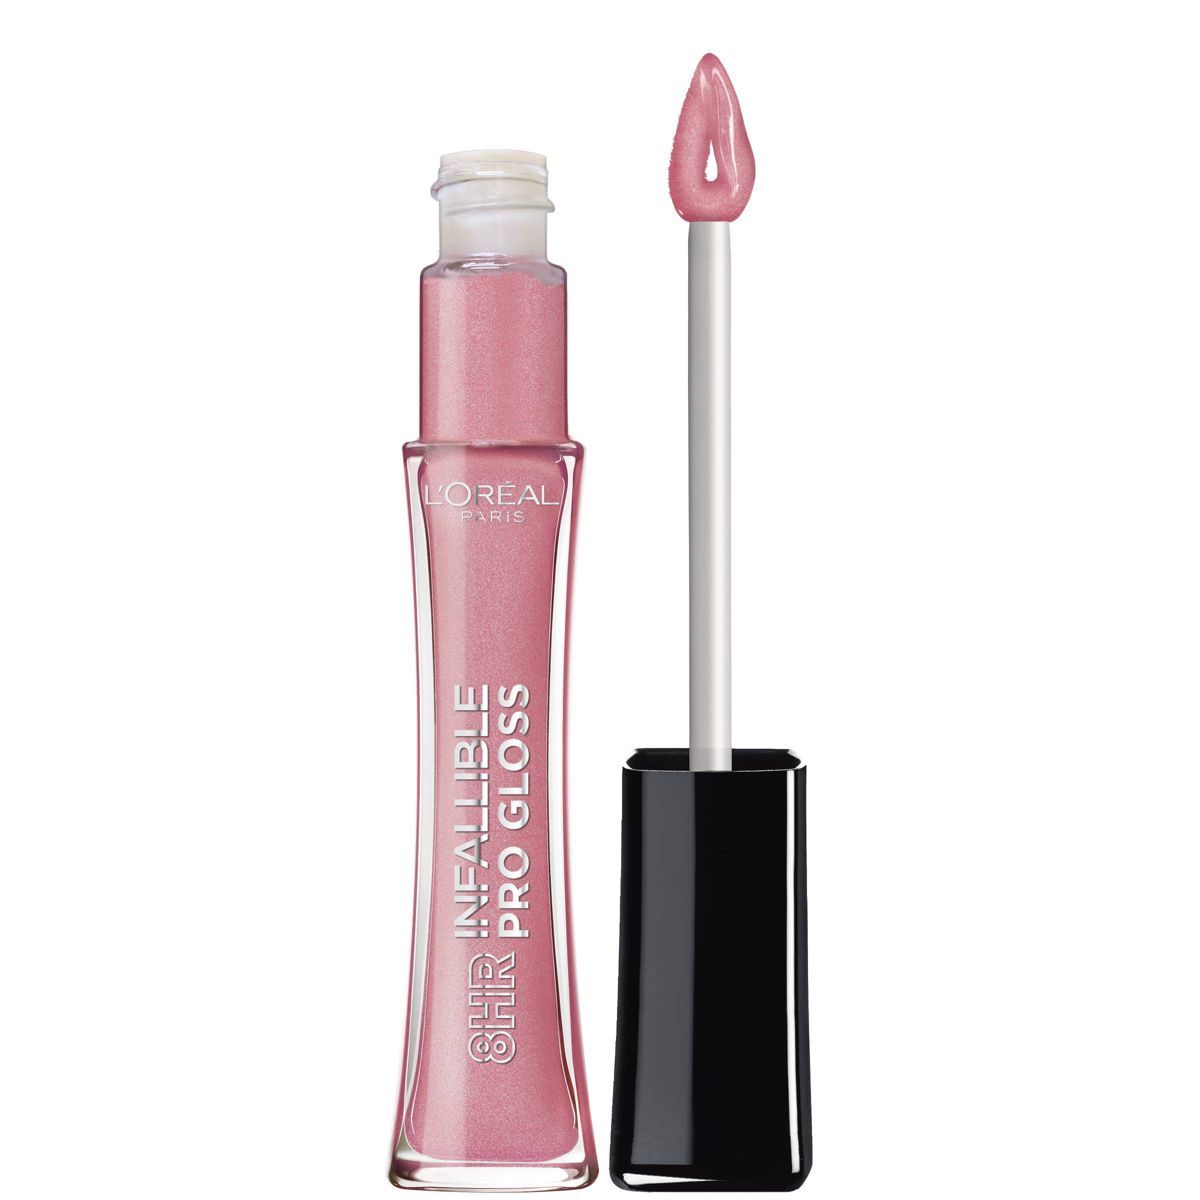 L'Oreal Paris Infallible 8HR Pro Lip Gloss with Hydrating Finish - 0.21 fl oz | Target